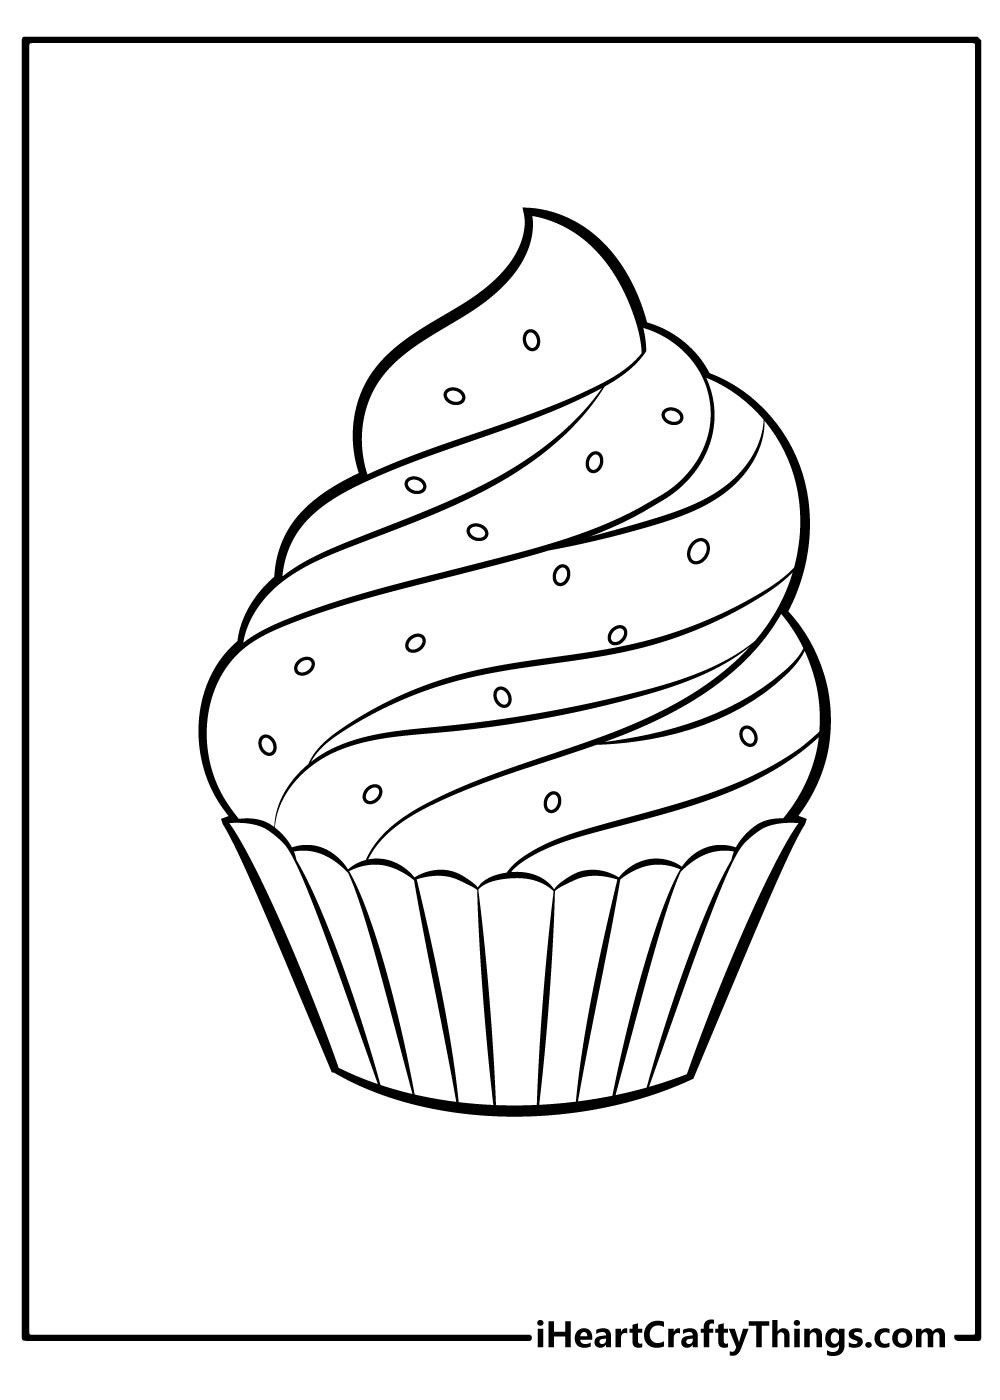 Printable Cupcake Coloring Pages Updated 20